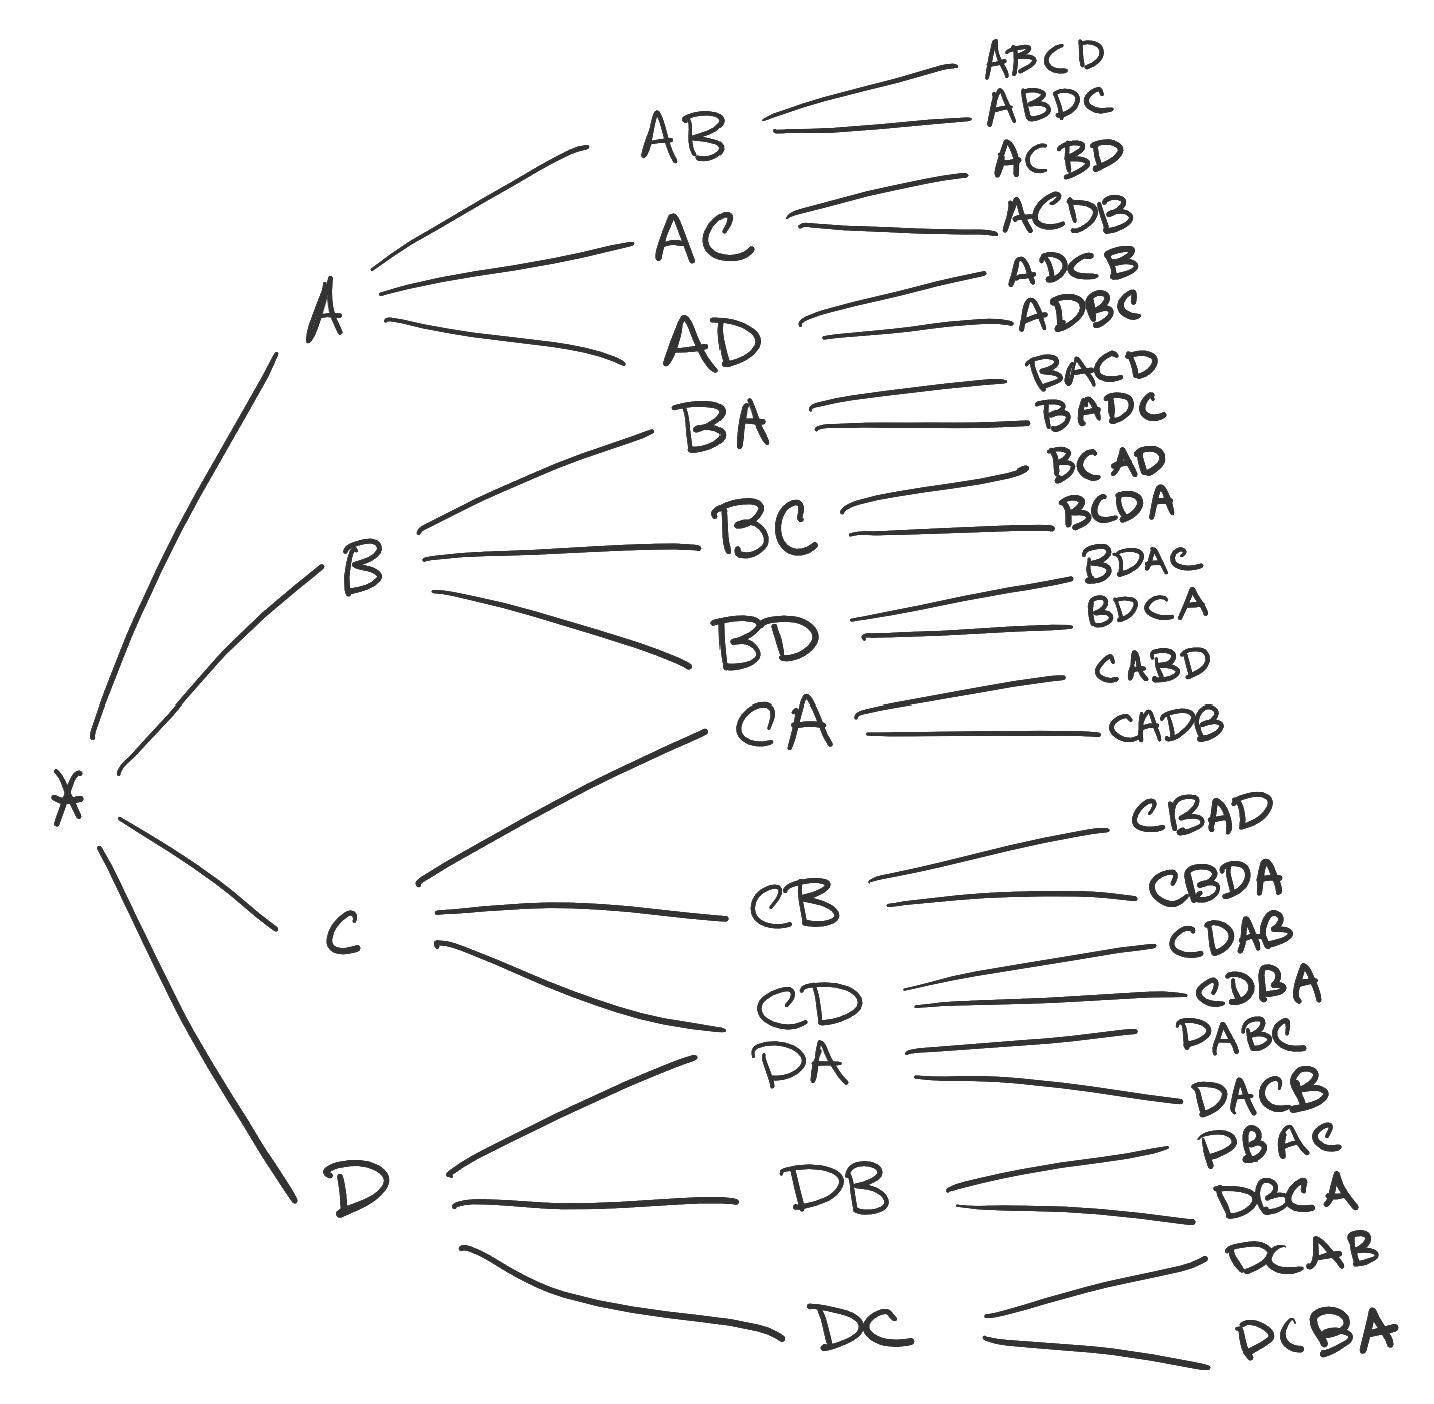 The 24 arrangements of abcd are visualized via a tree diagram.